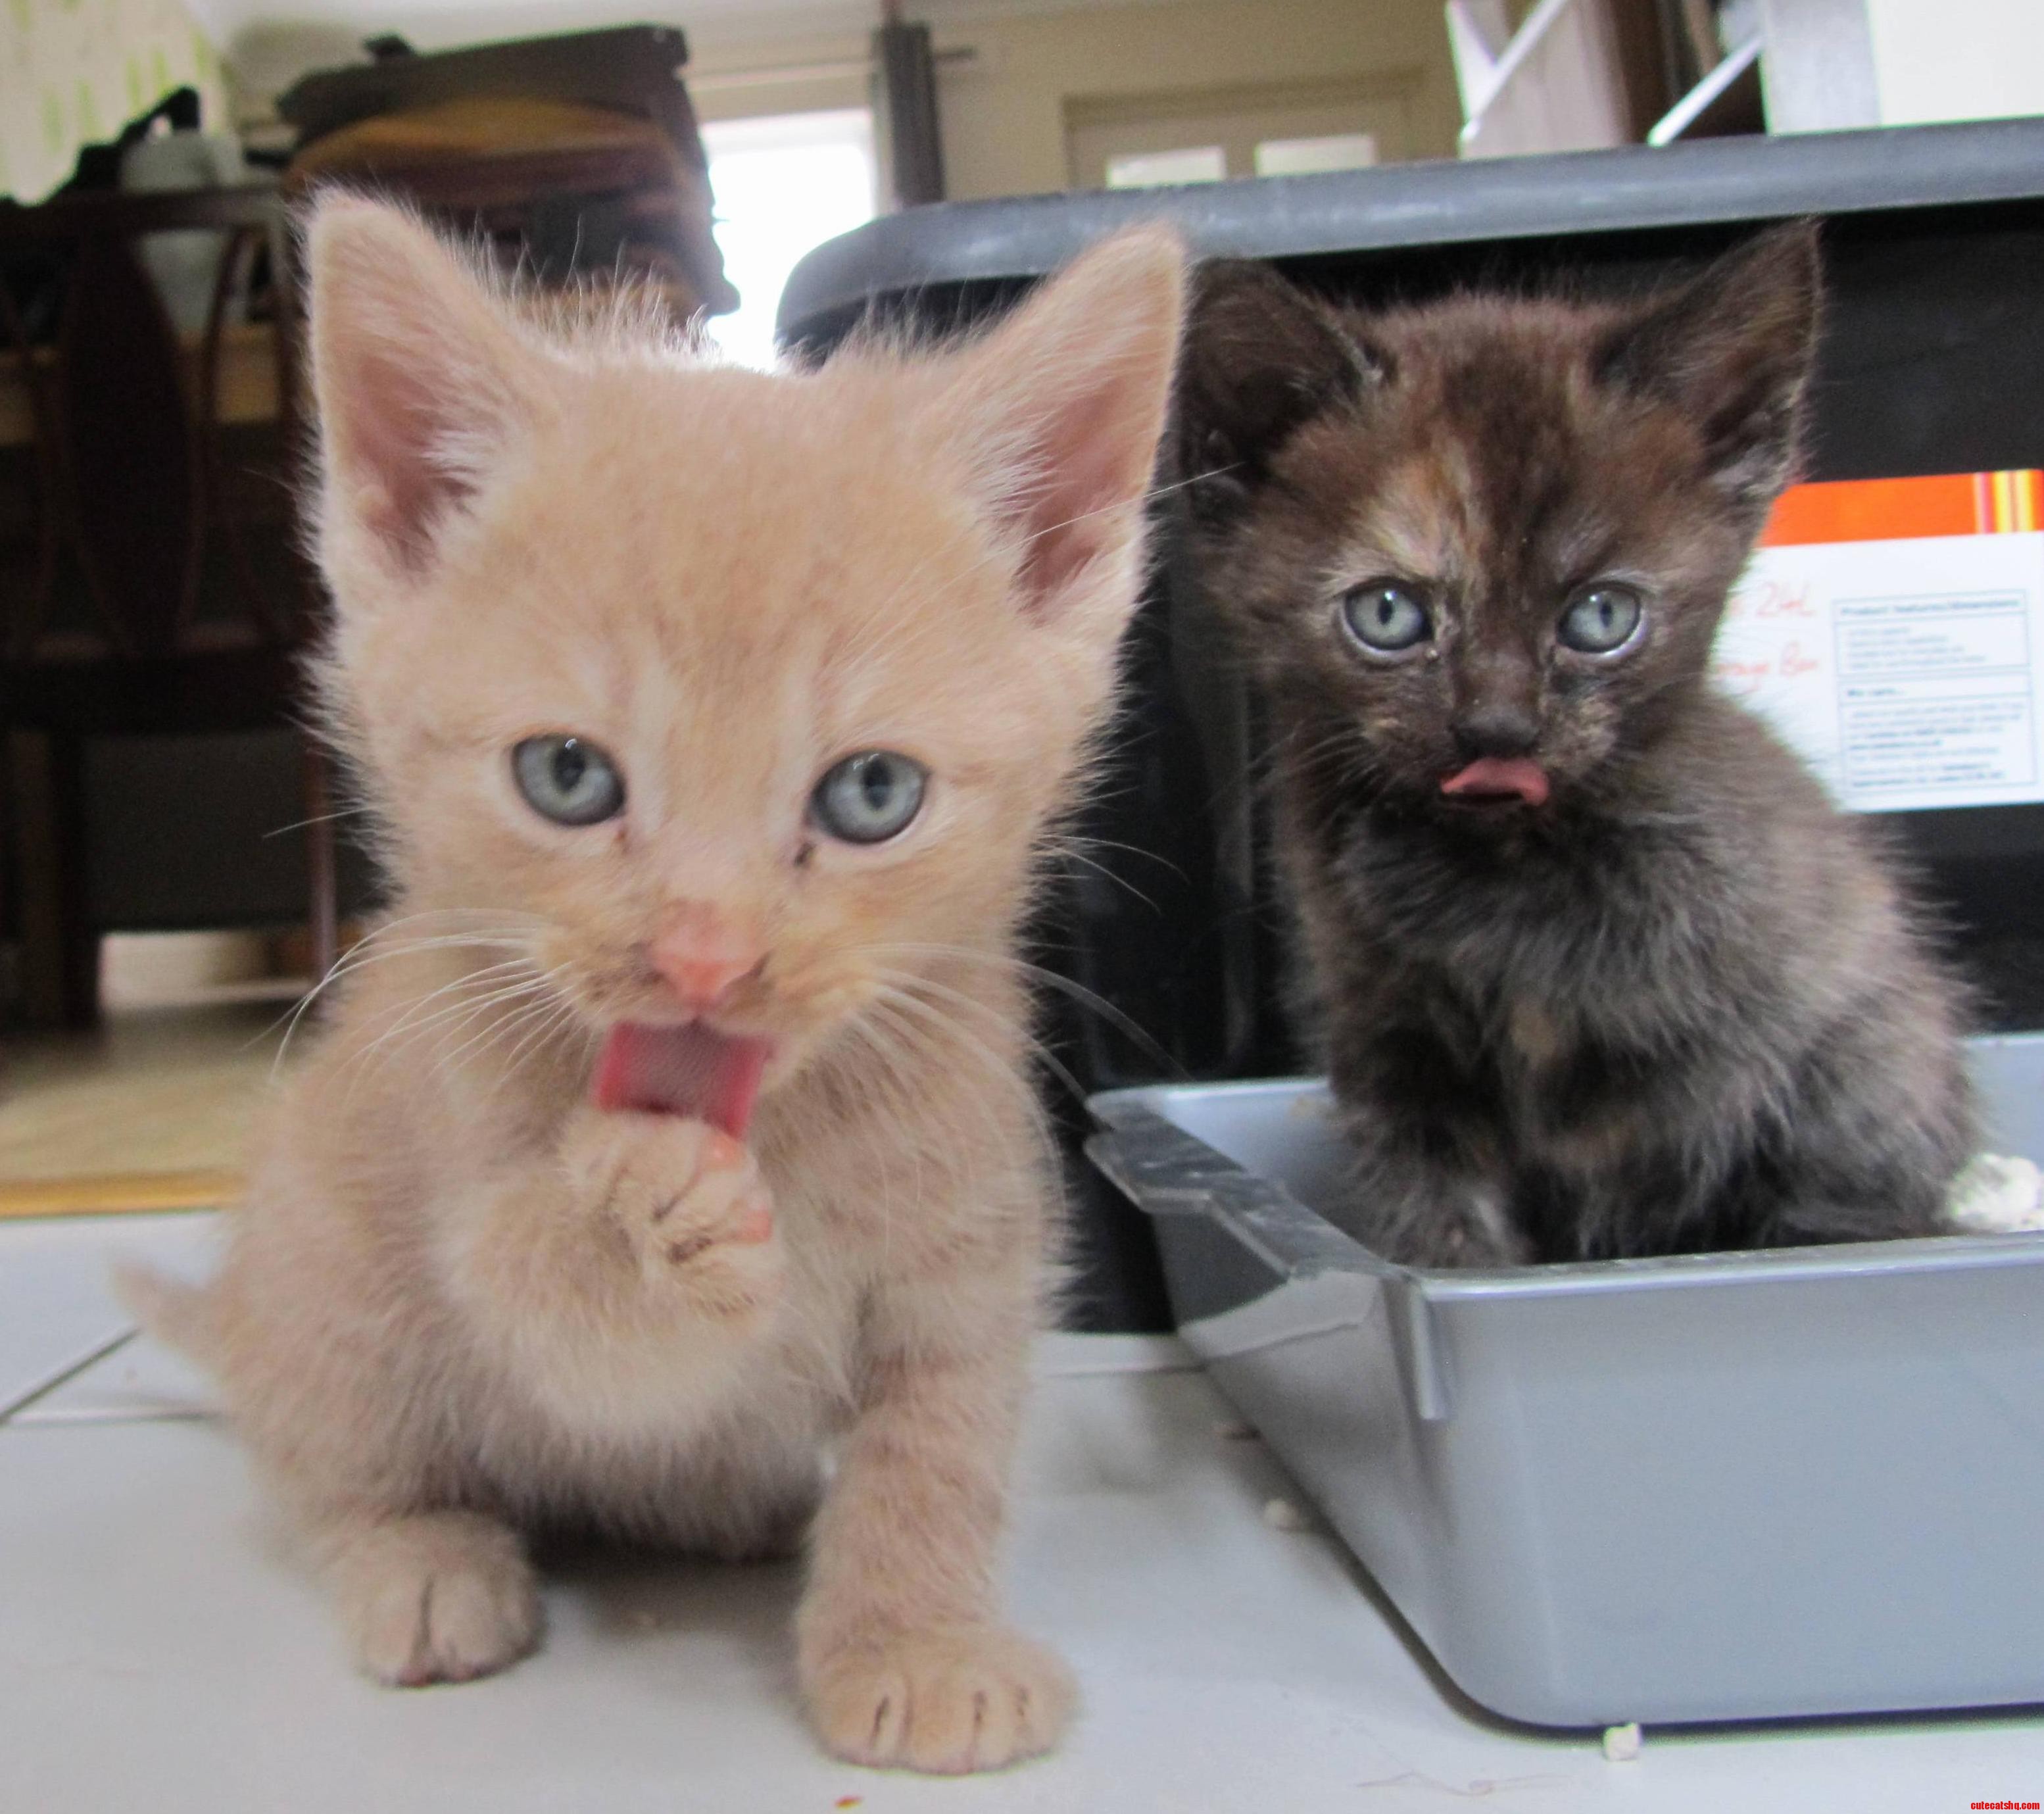 Kittens tongues…